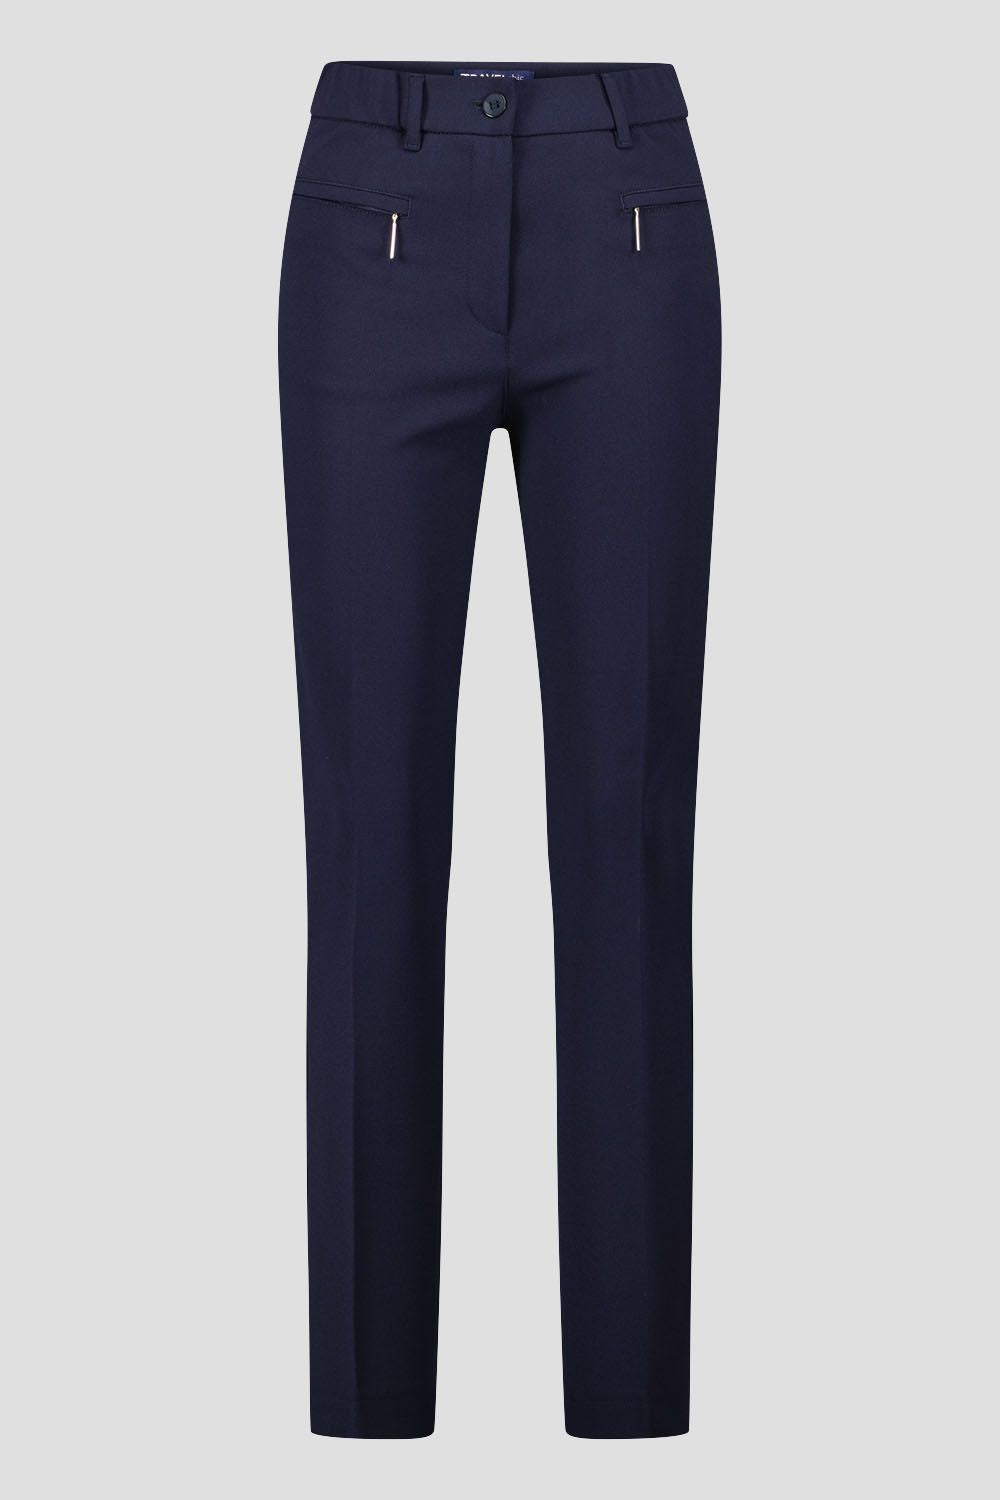 Travel Chic Wrinkle Free Pant